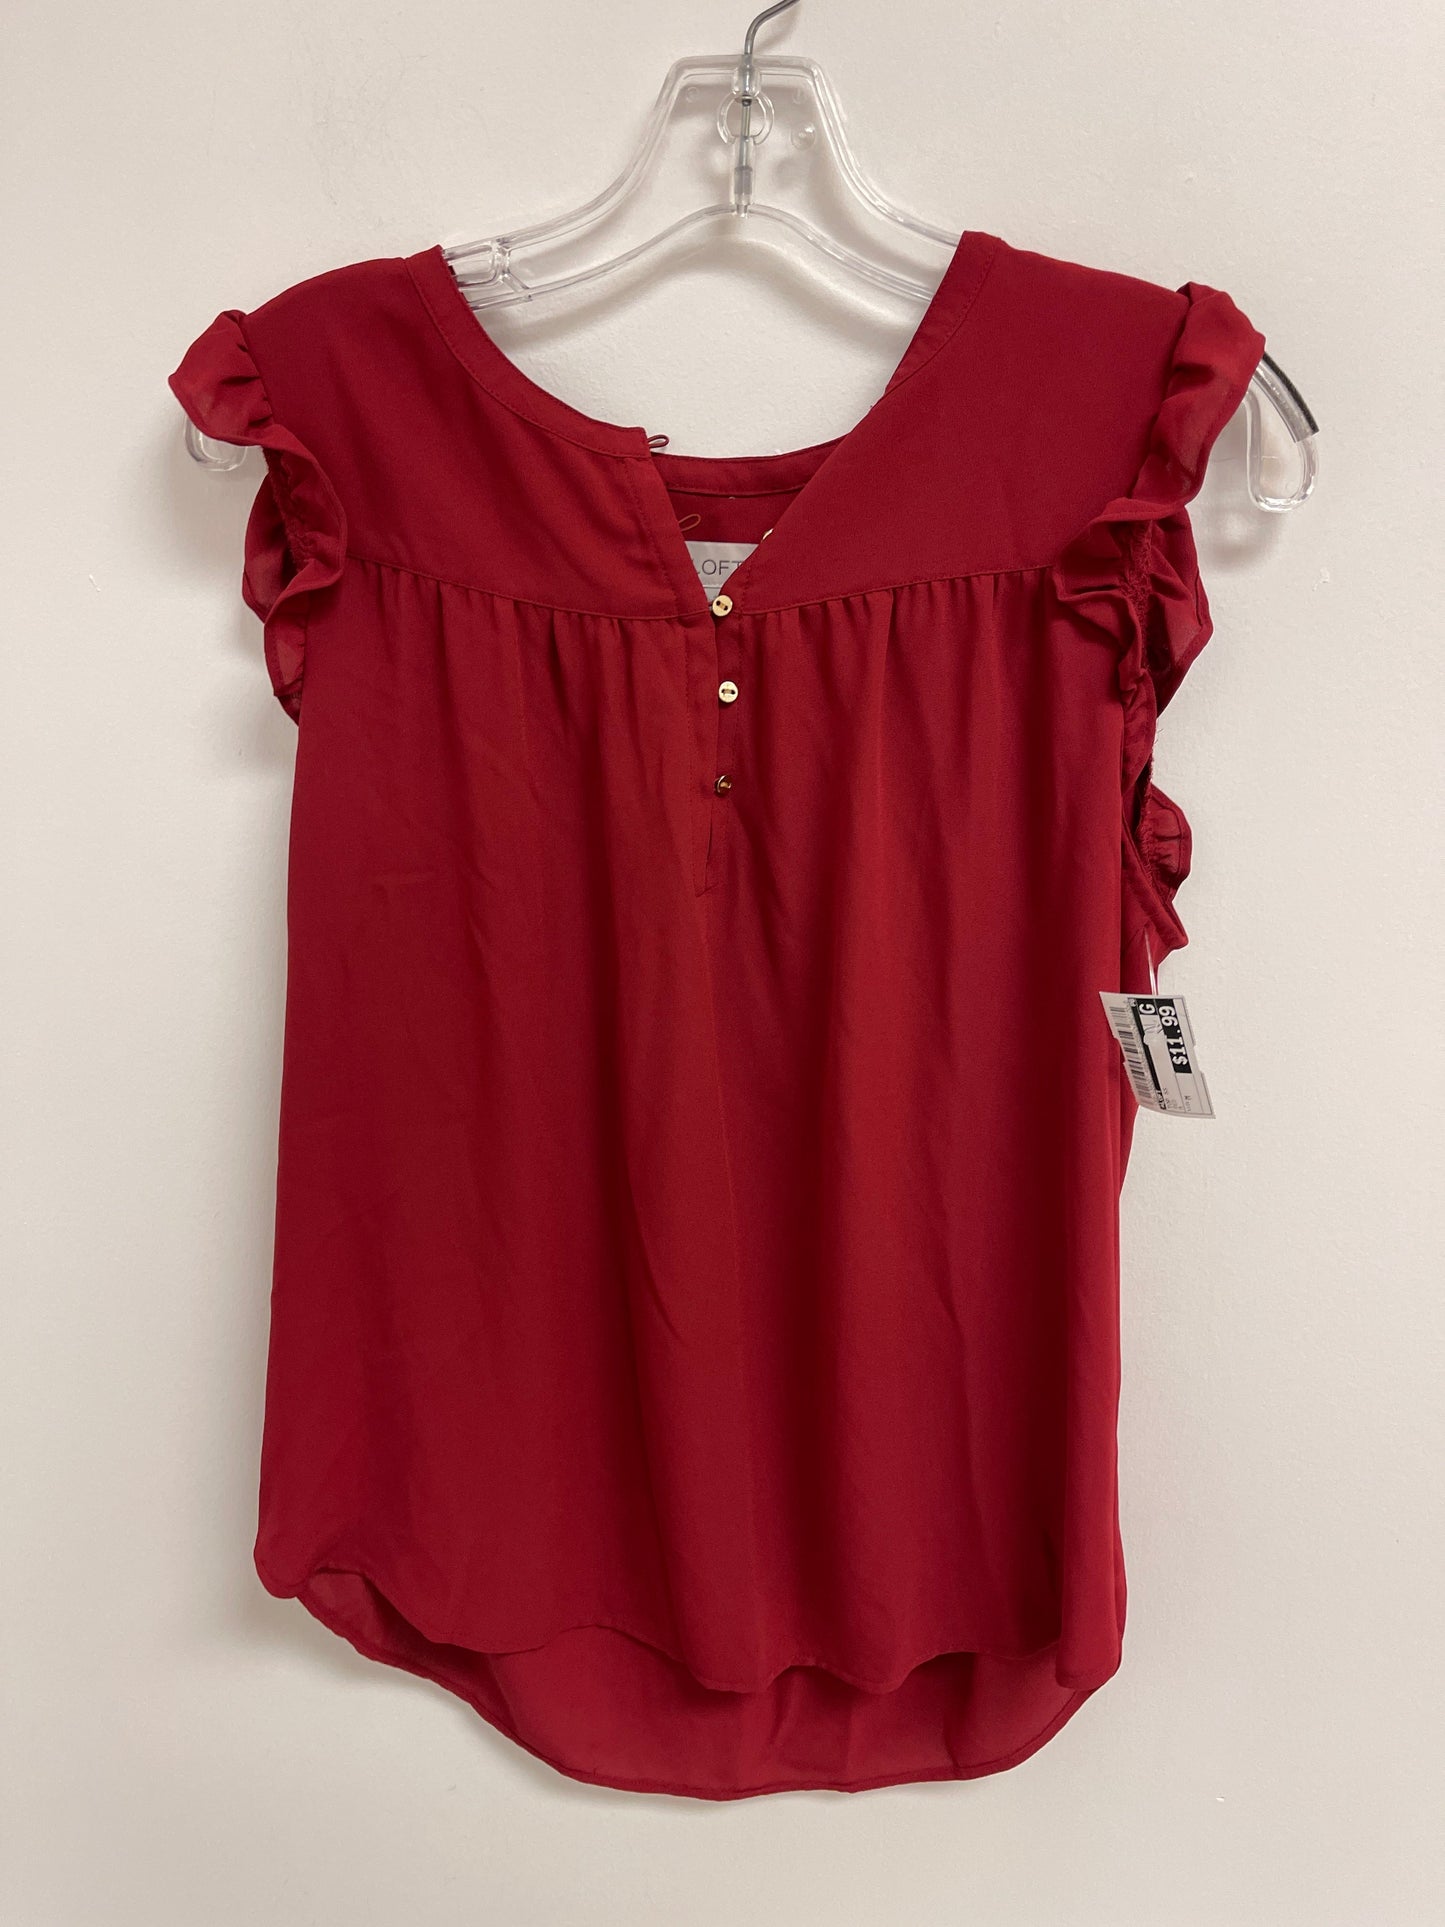 Red Top Short Sleeve Loft, Size M